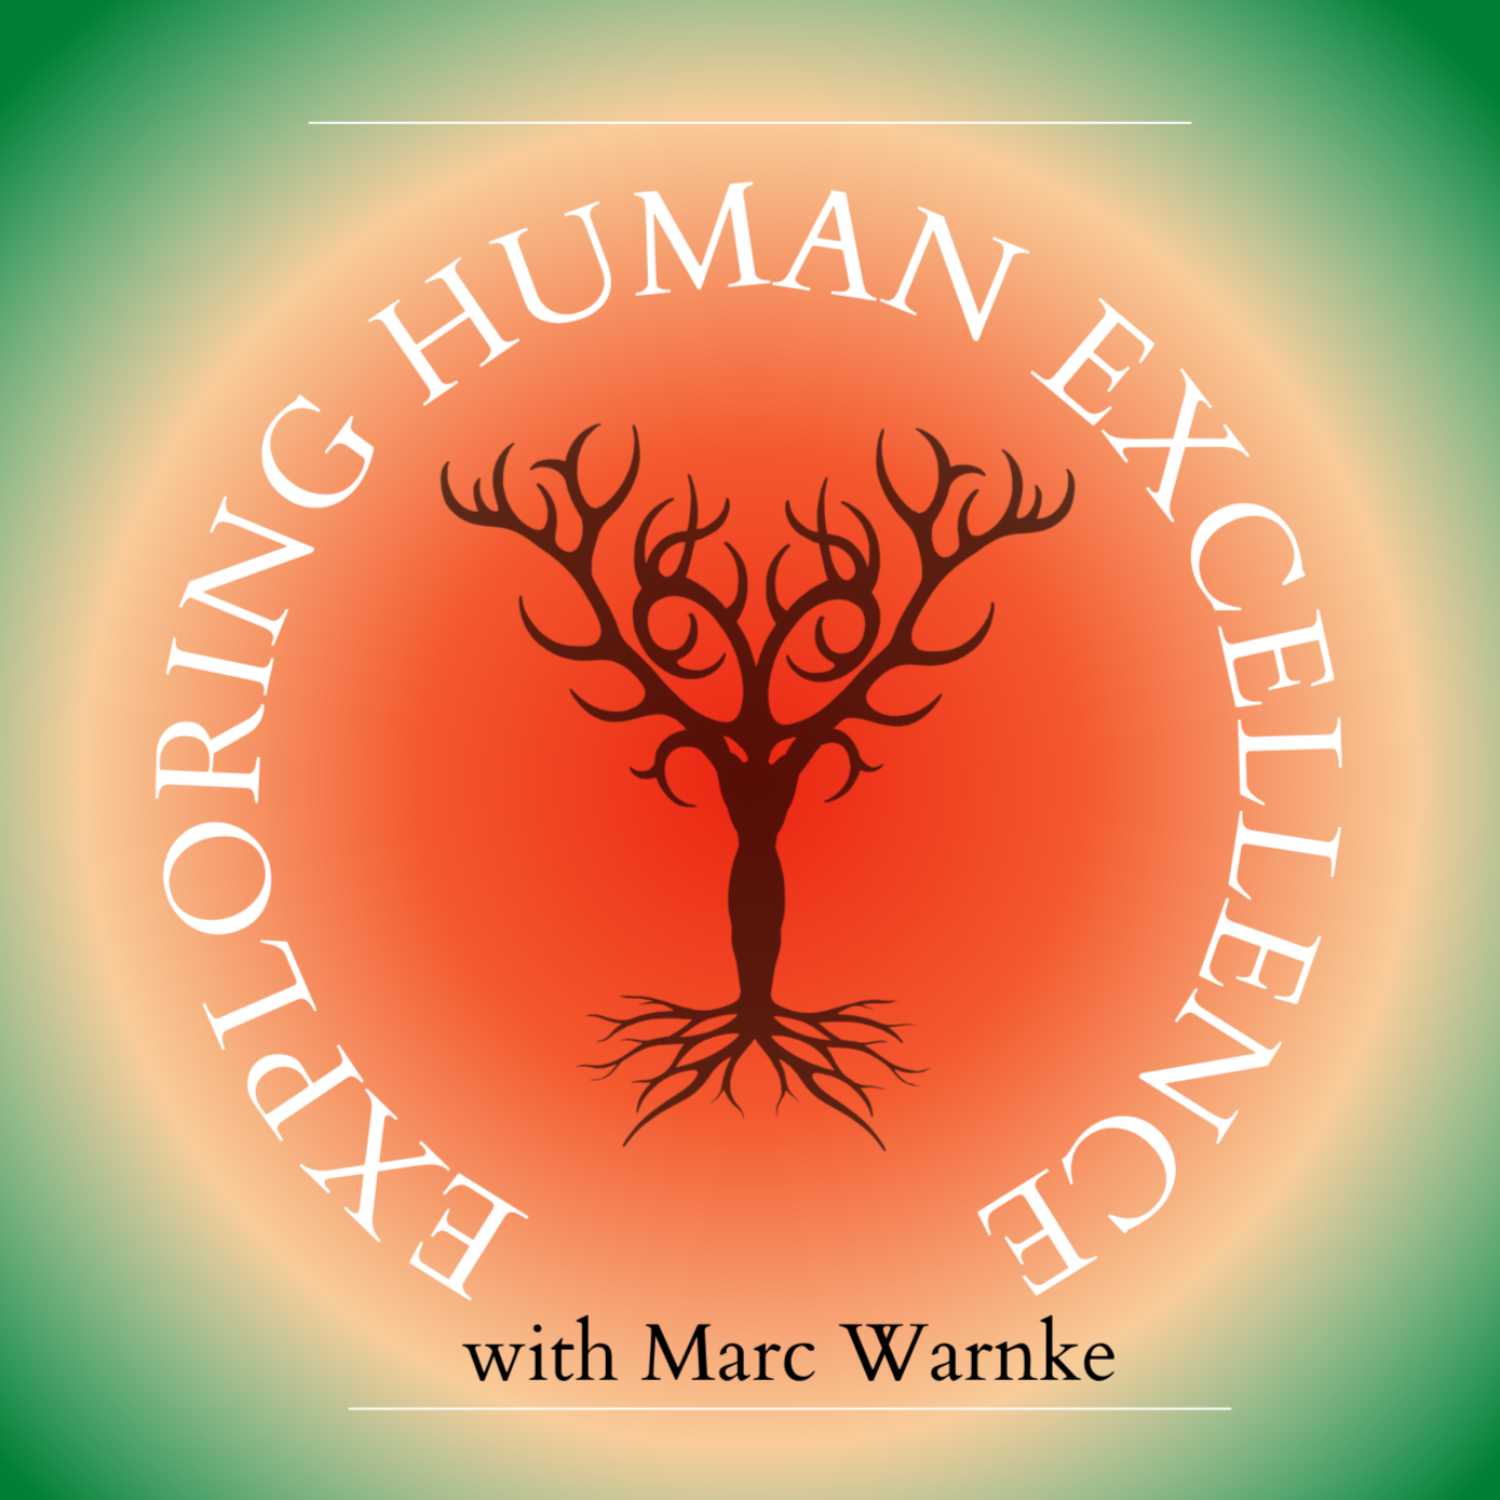 Exploring Human Excellence with Marc Warnke